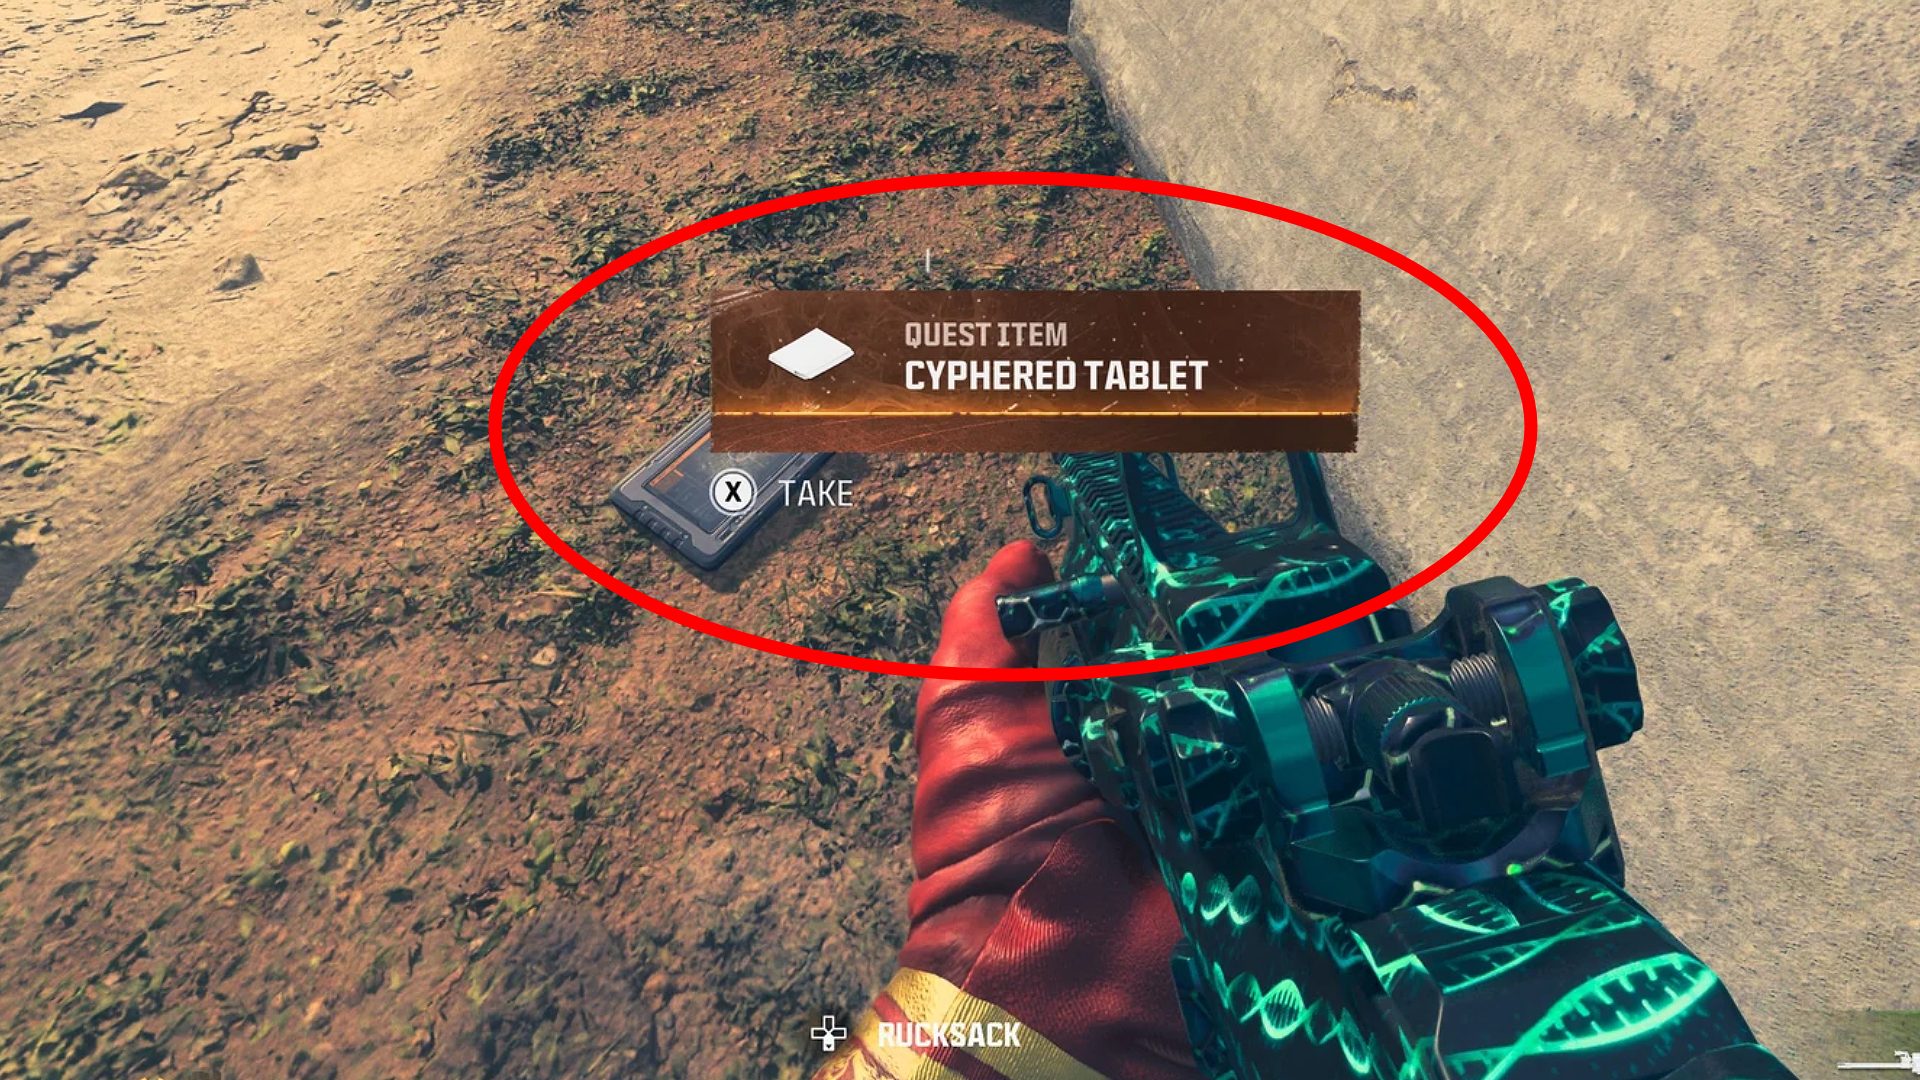 The Cyphered Tablet in MW3 Zombies